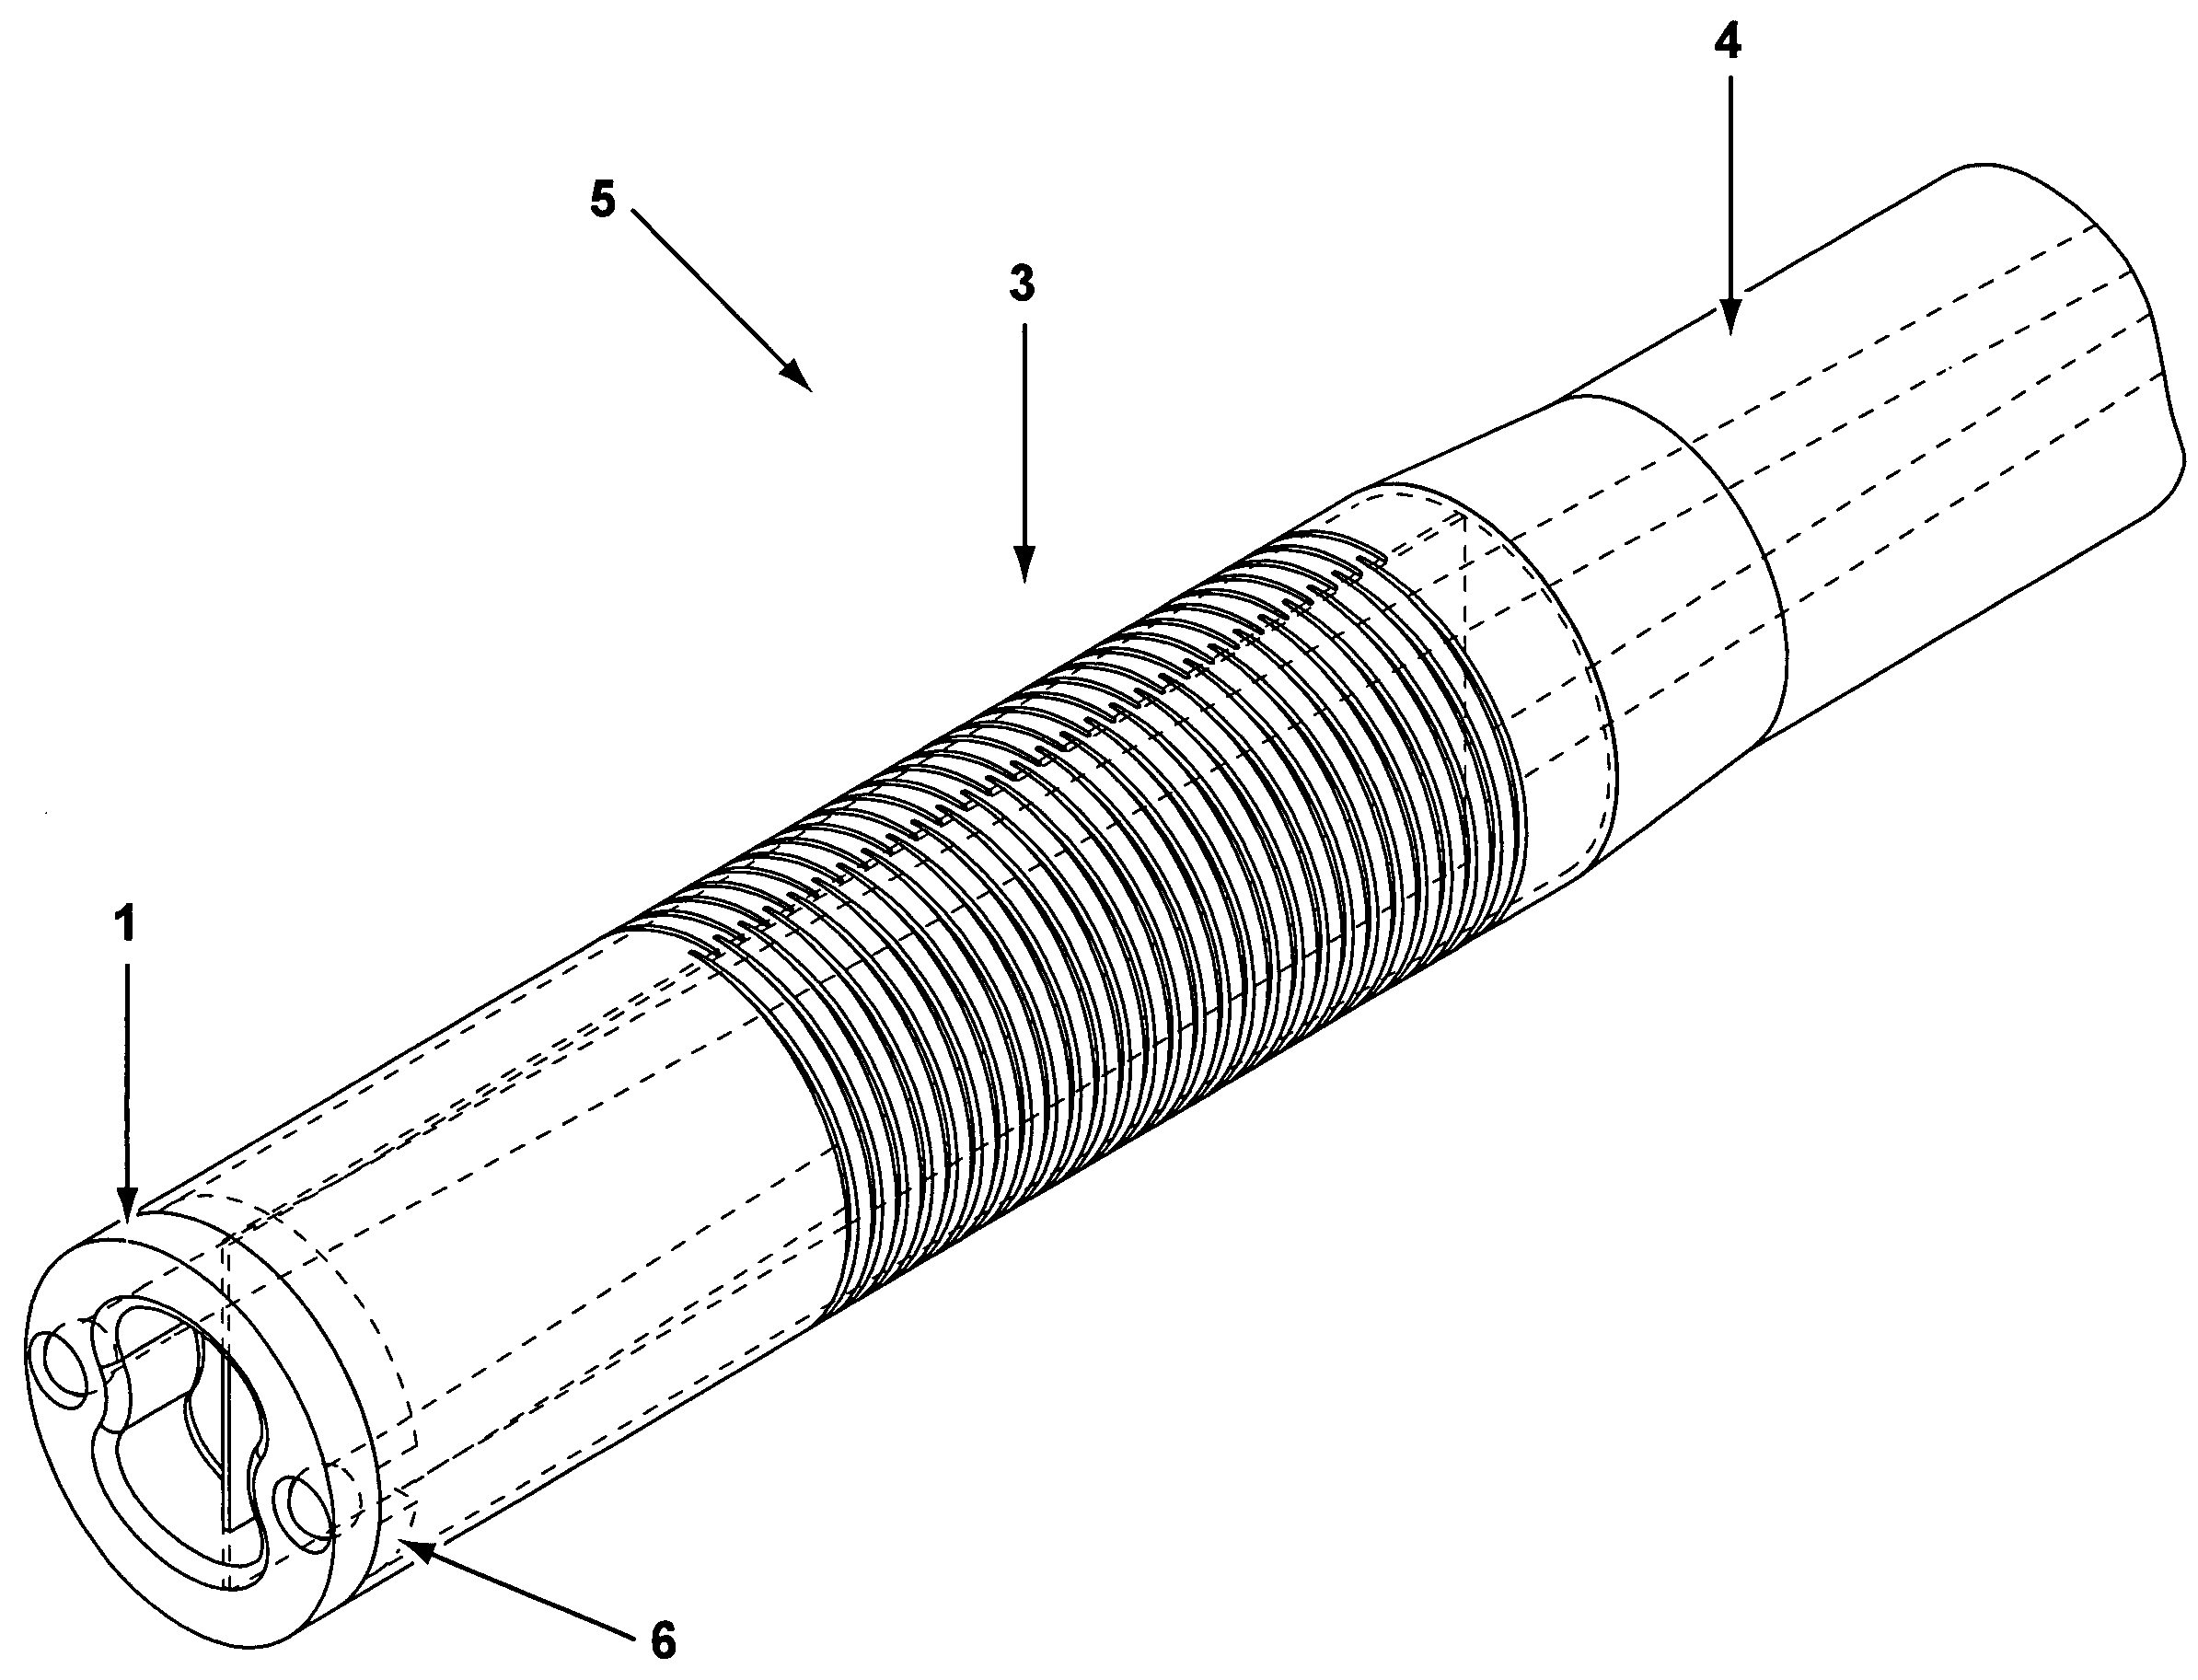 Steerable ablation device